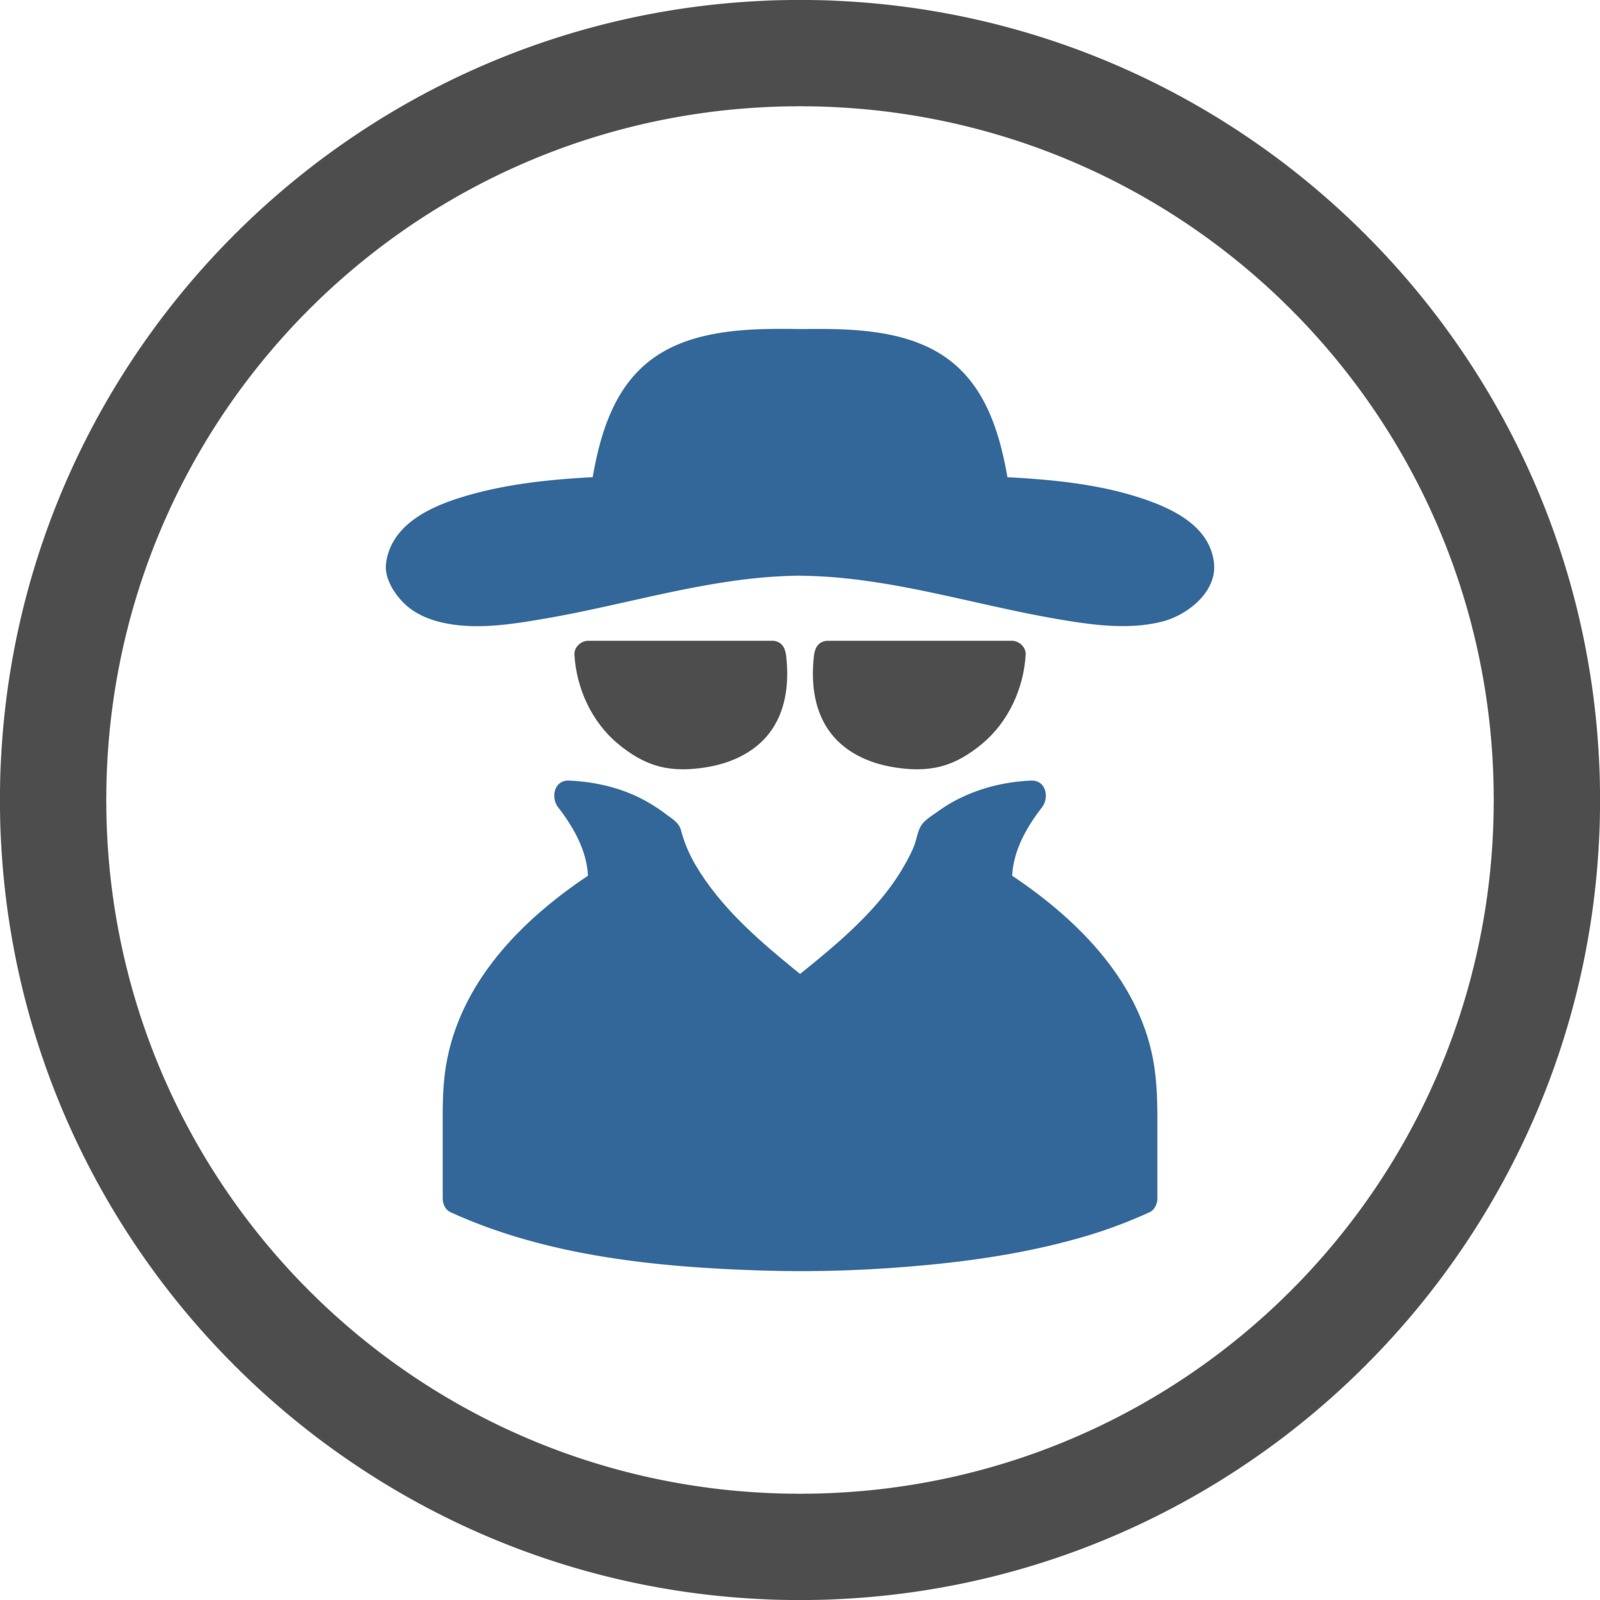 Spy flat cobalt and gray colors rounded vector icon by ahasoft